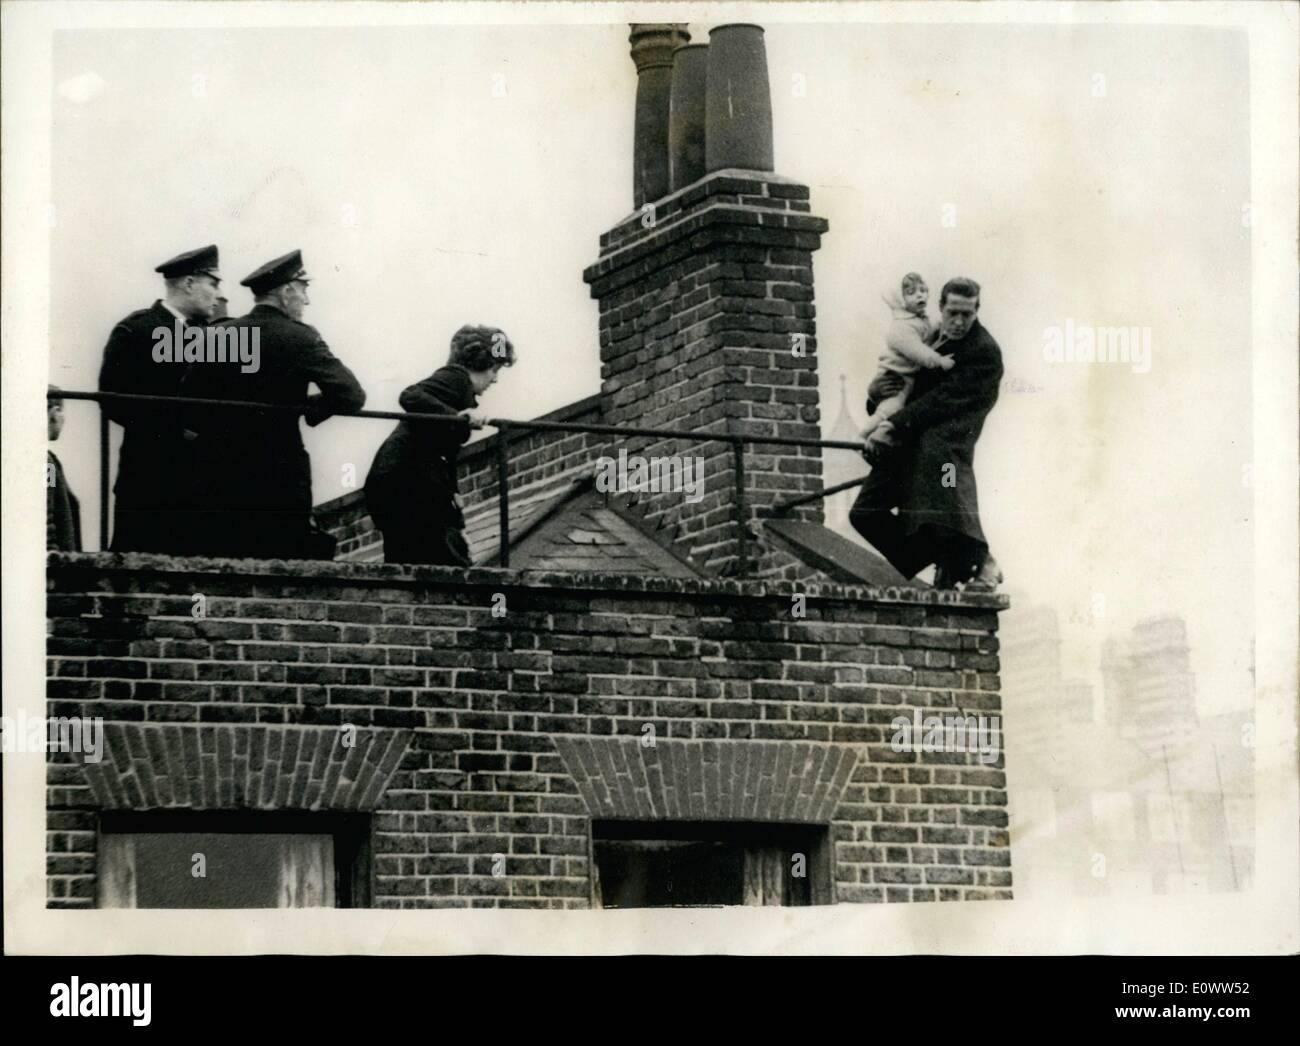 Mar. 03, 1964 - MAN WITH A CHILD IN HIS ARMS THREATENS TO JUMP FROM THE ROOF OF A THREE STOREY BUILDING. Fireman and police were called to Marchmont Street, Bloomsbury, this evening, when a man with a baby in his arms threatened to jump from the roof of a three storey building, talking the child with him. A crowd of several hundred people gathered below as Woman police Constable Margaret Clelland, who had been trying to reason with the man, drew closer to him and grabbed the baby from his arms. Four other policemen rushed forward and grabbed the man Stock Photo